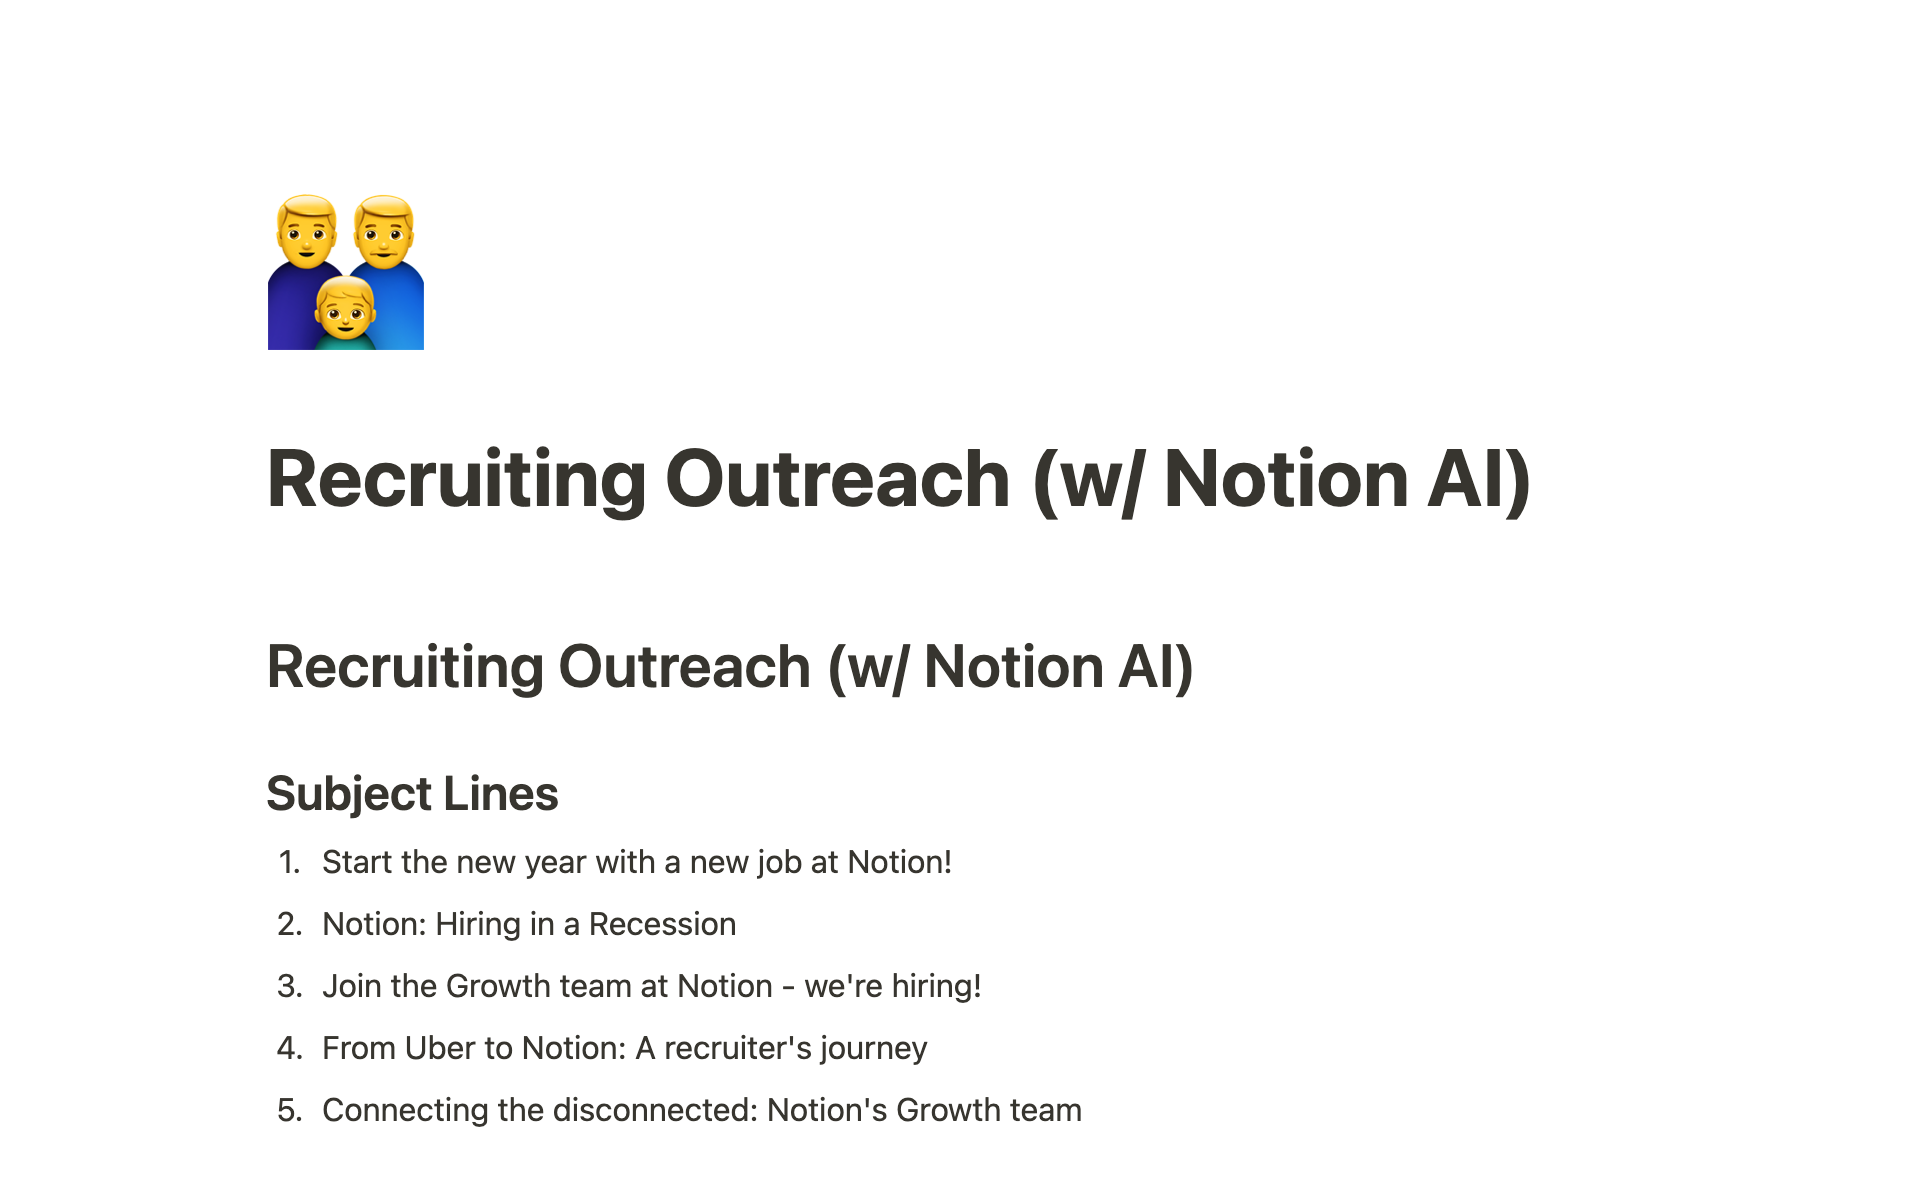 Quickly draft outbound emails with the help of Notion AI. Generate multiple subject lines and pick your favorite, or test them all! 